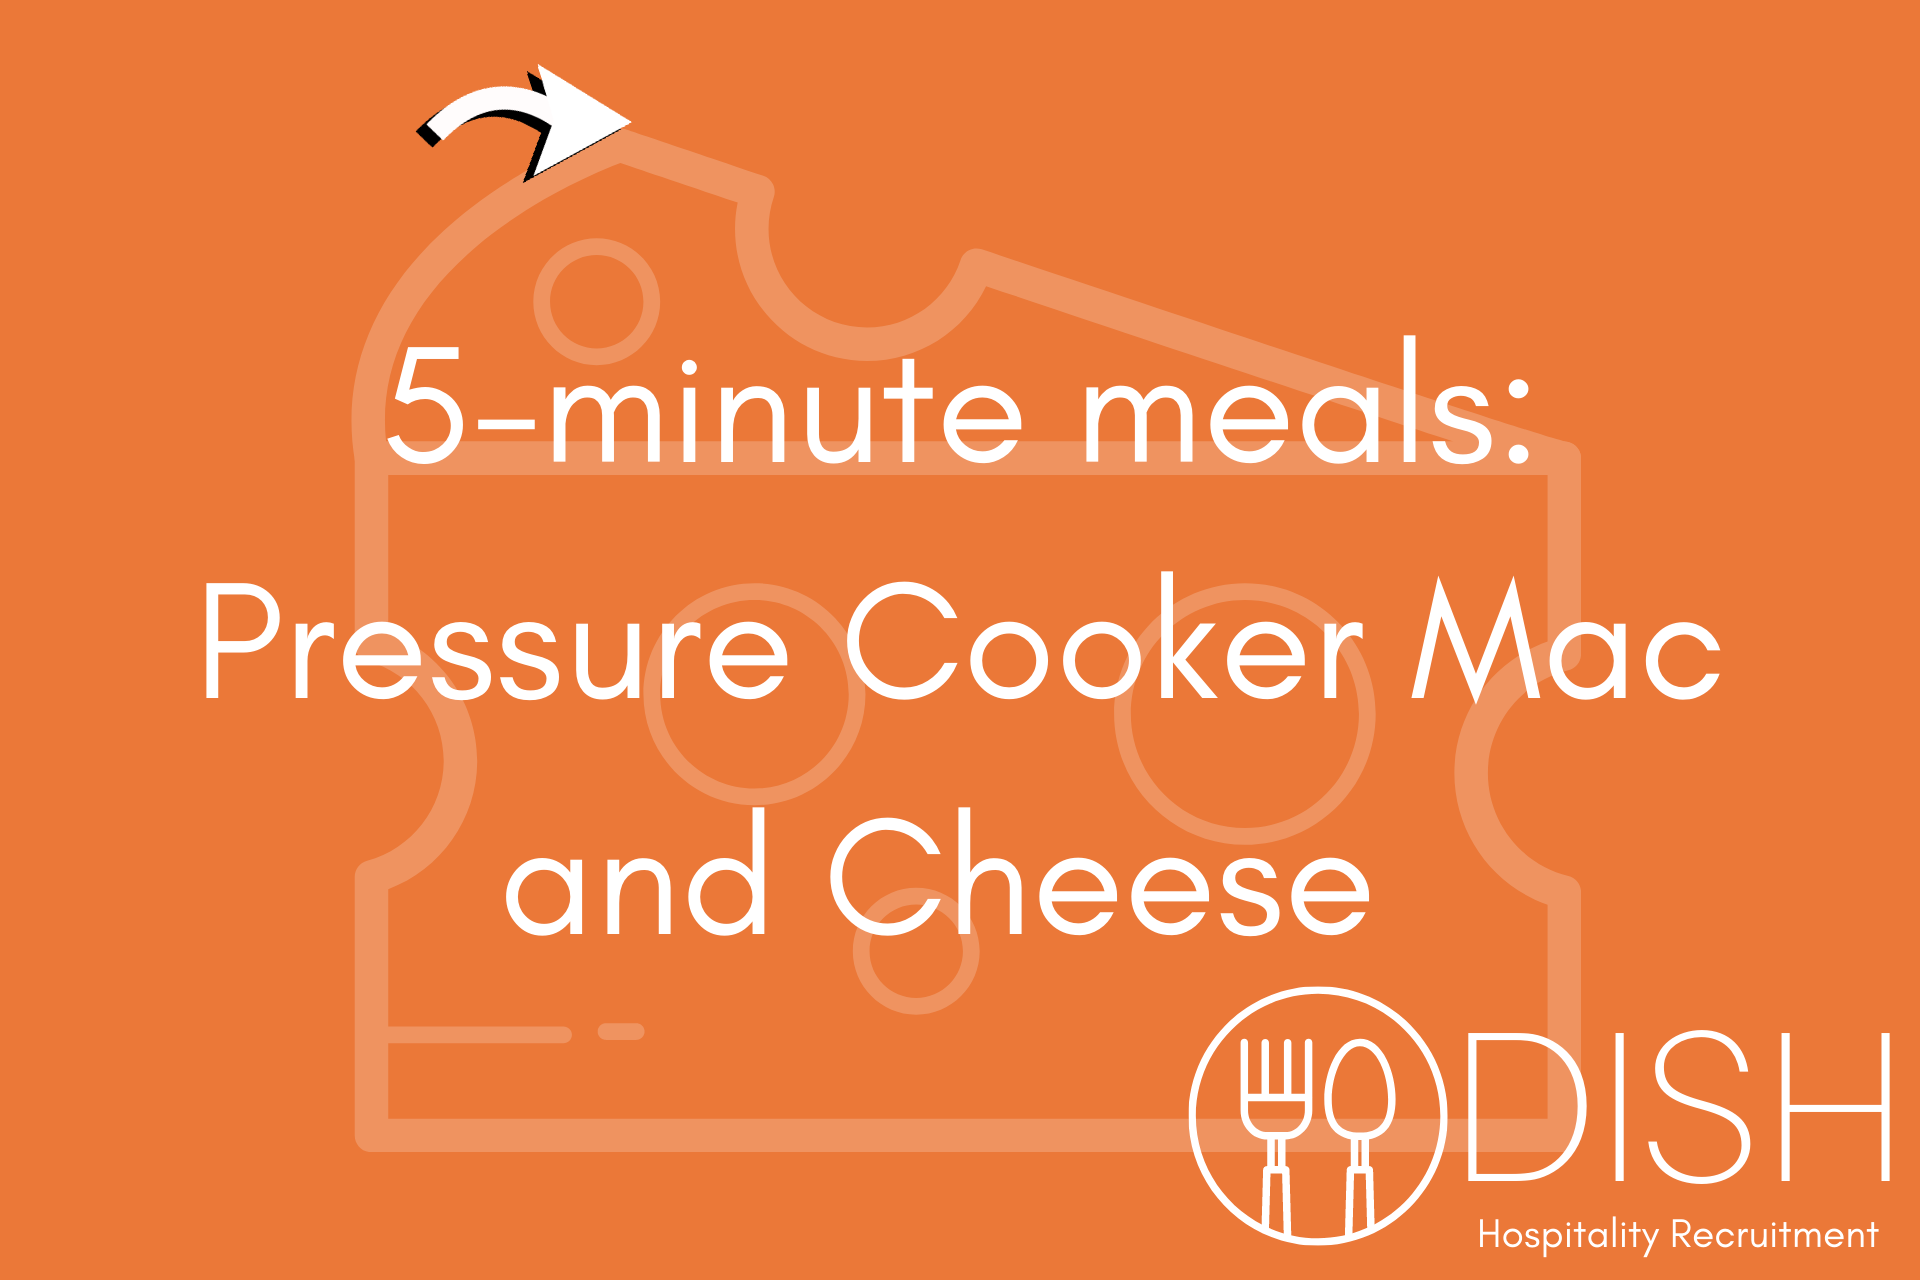 5-minute meals: Pressure Cooker Mac and Cheese